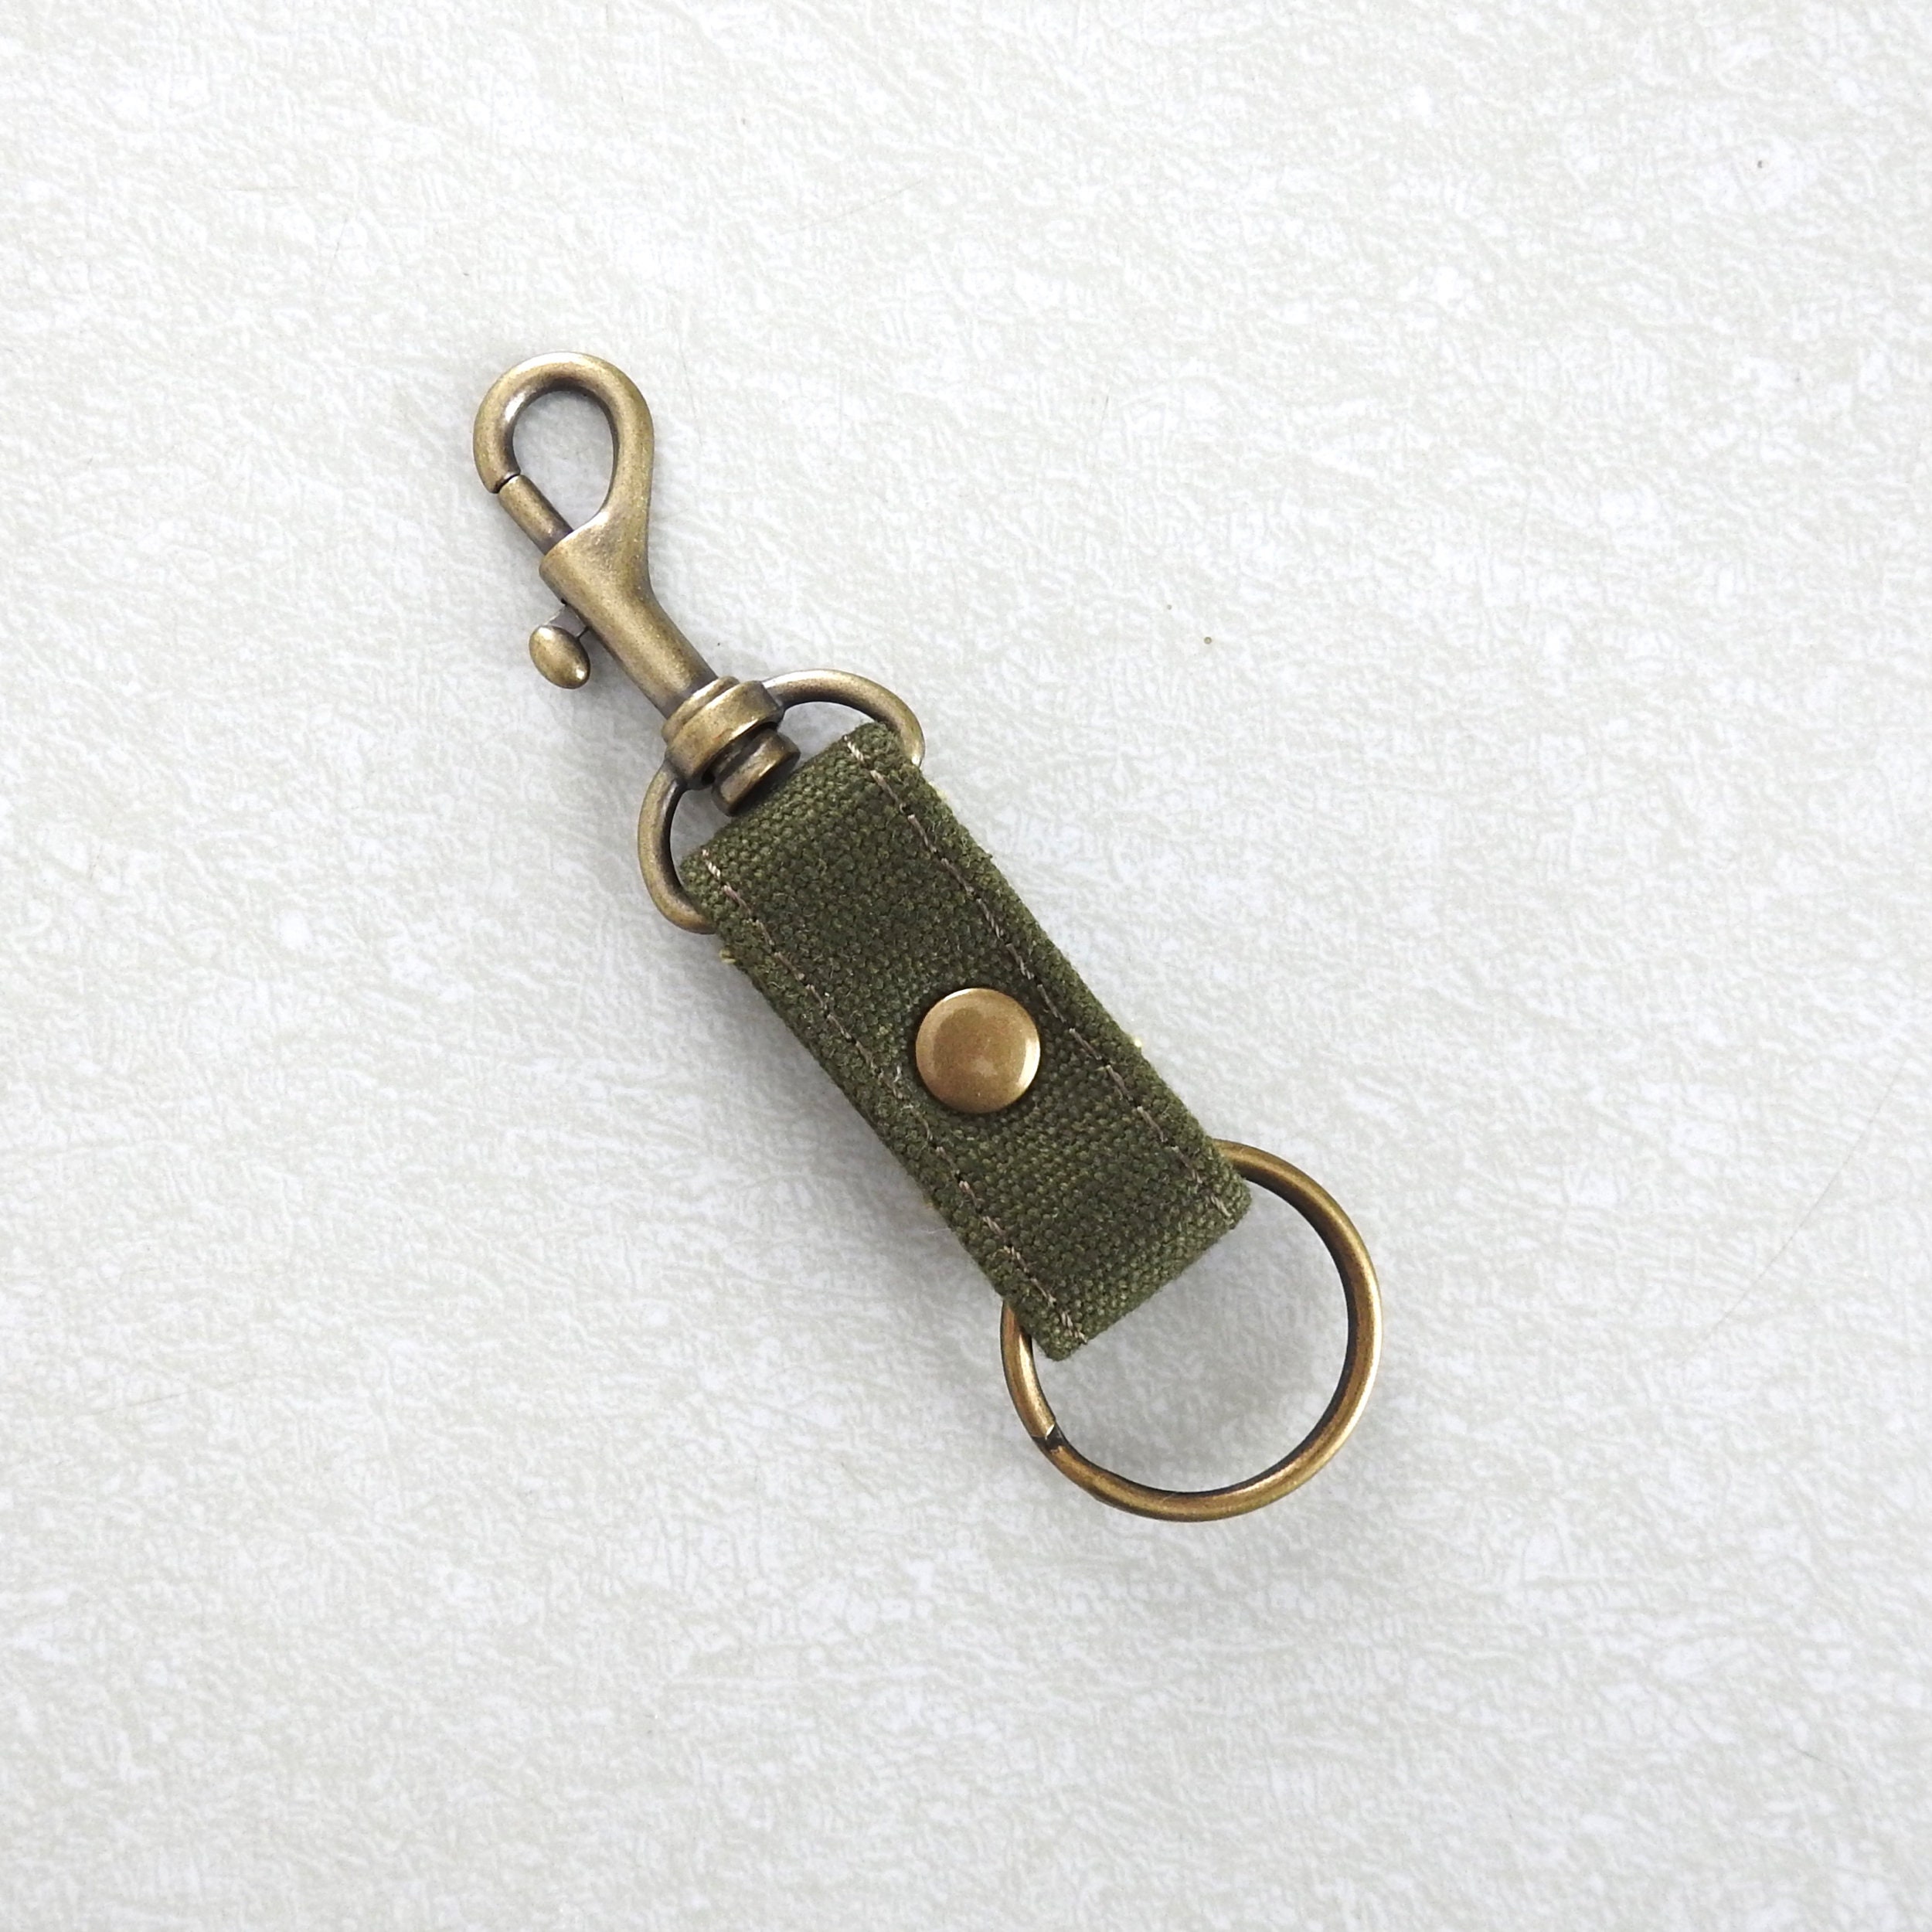 Green Leather Key Chain, Stainless Steel Carabiner Clip, Custom